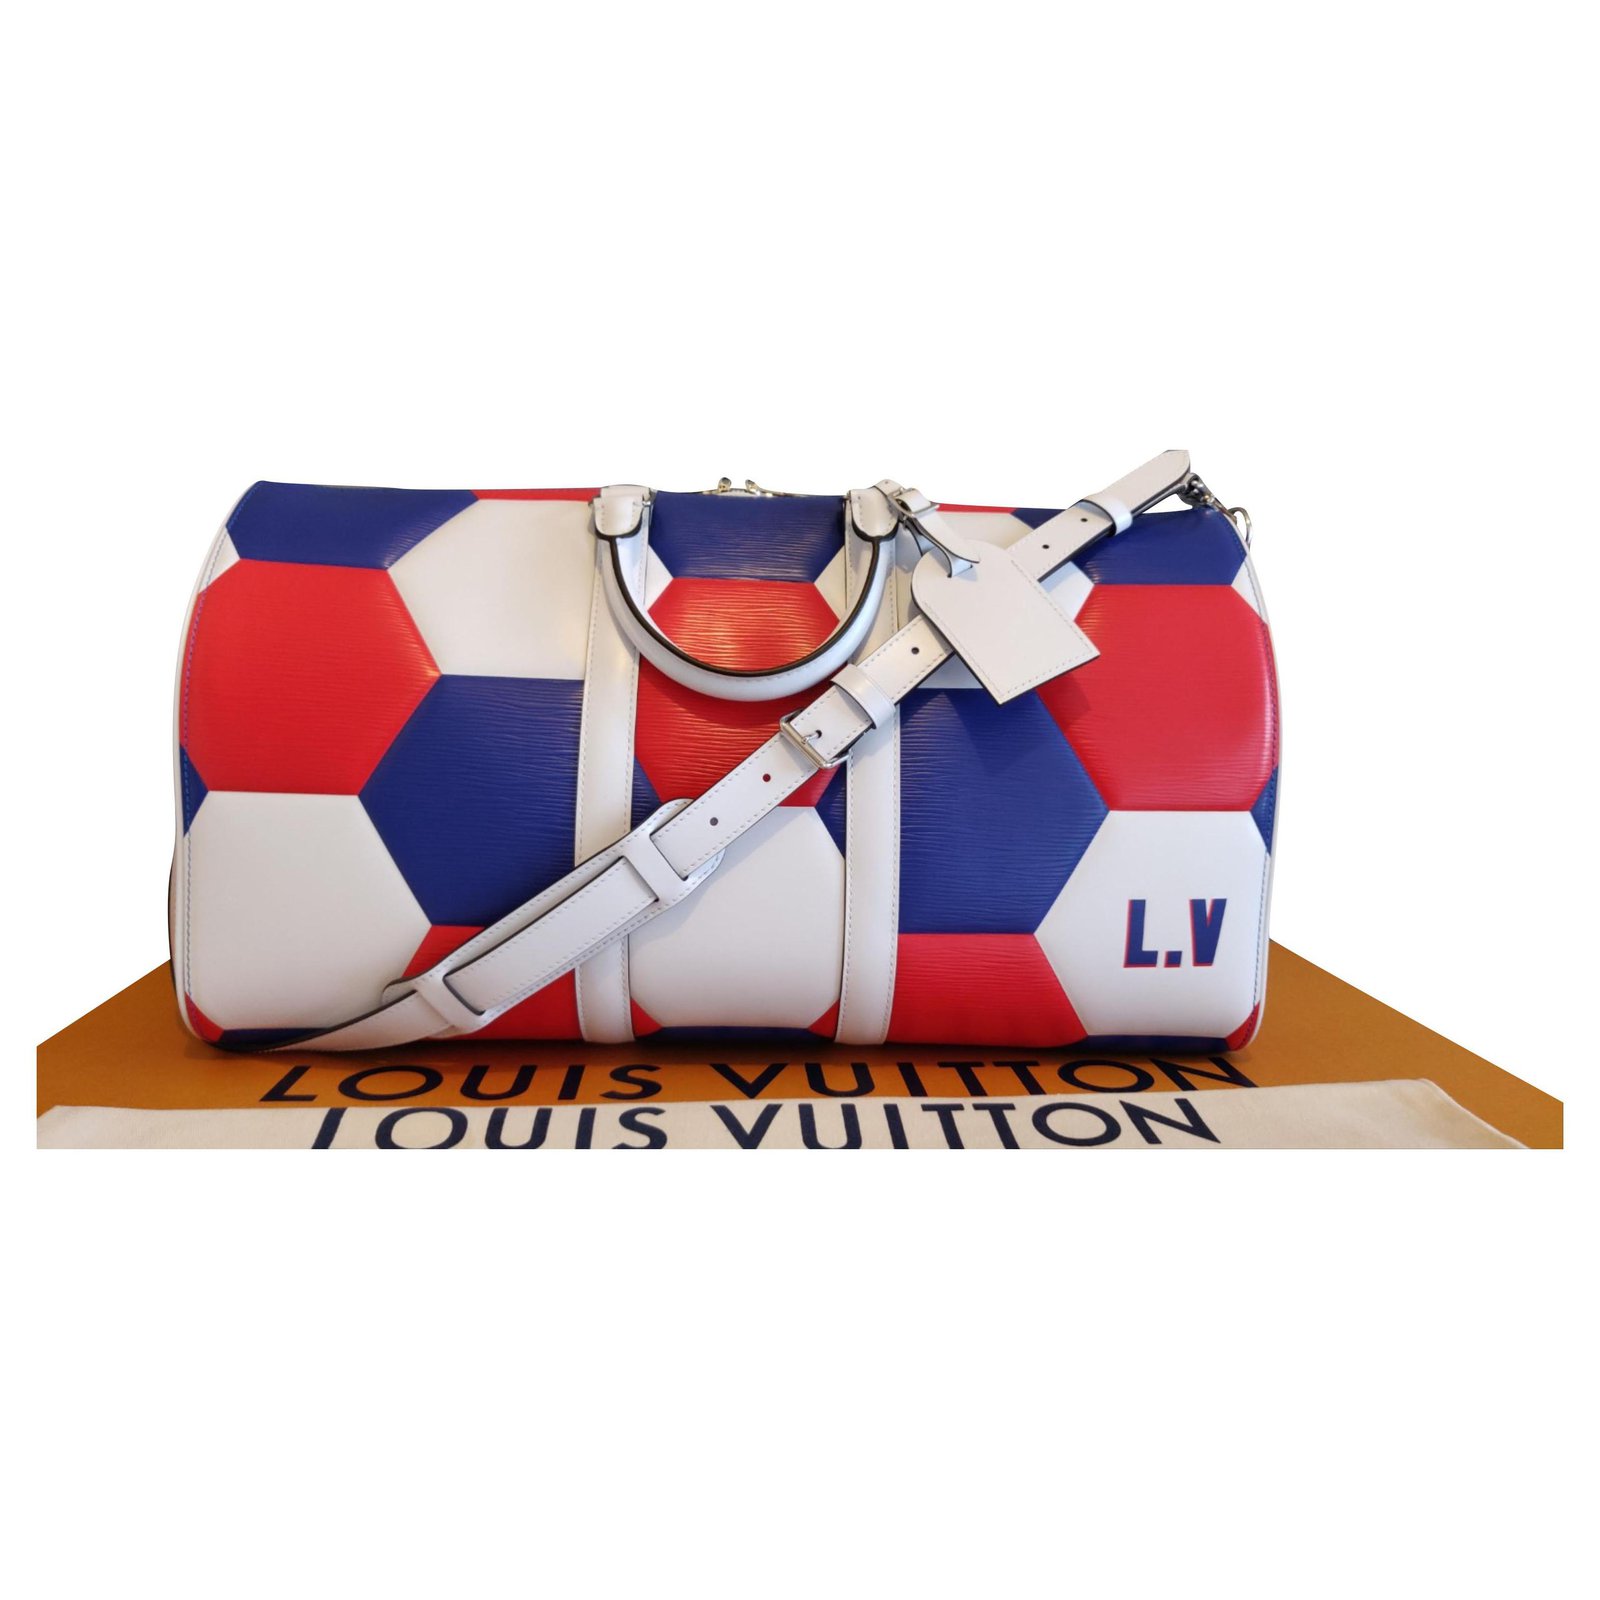 FIFA World Cup Red, White & Blue Leather Keepall Bandouliere 50